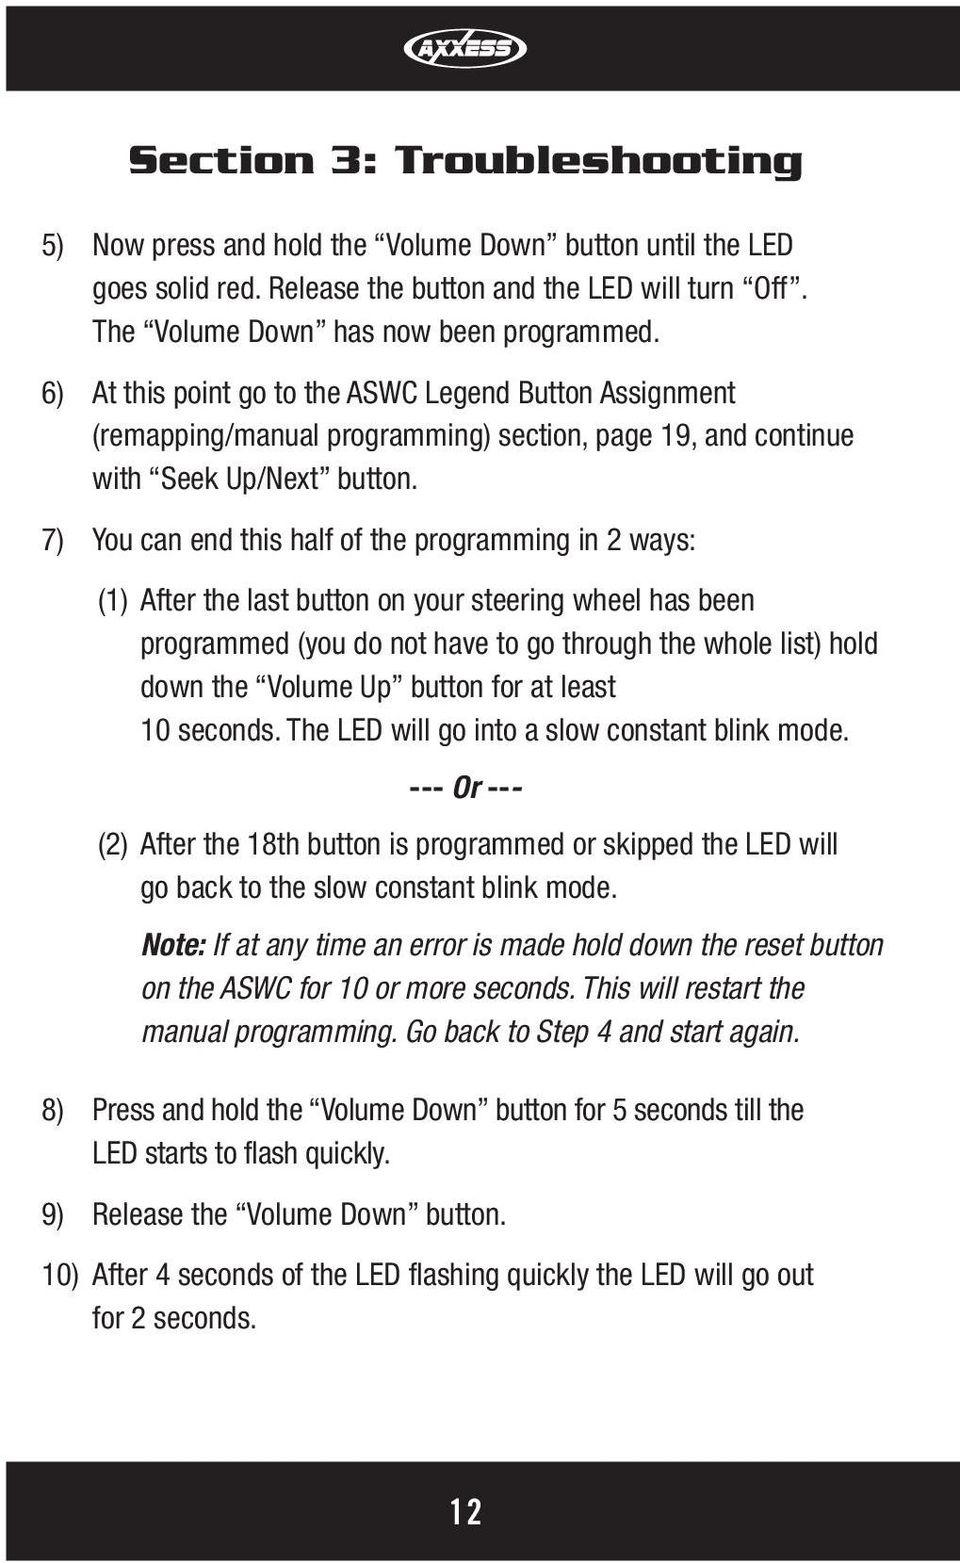 7) You can end this half of the programming in 2 ways: (1) After the last button on your steering wheel has been programmed (you do not have to go through the whole list) hold down the Volume Up